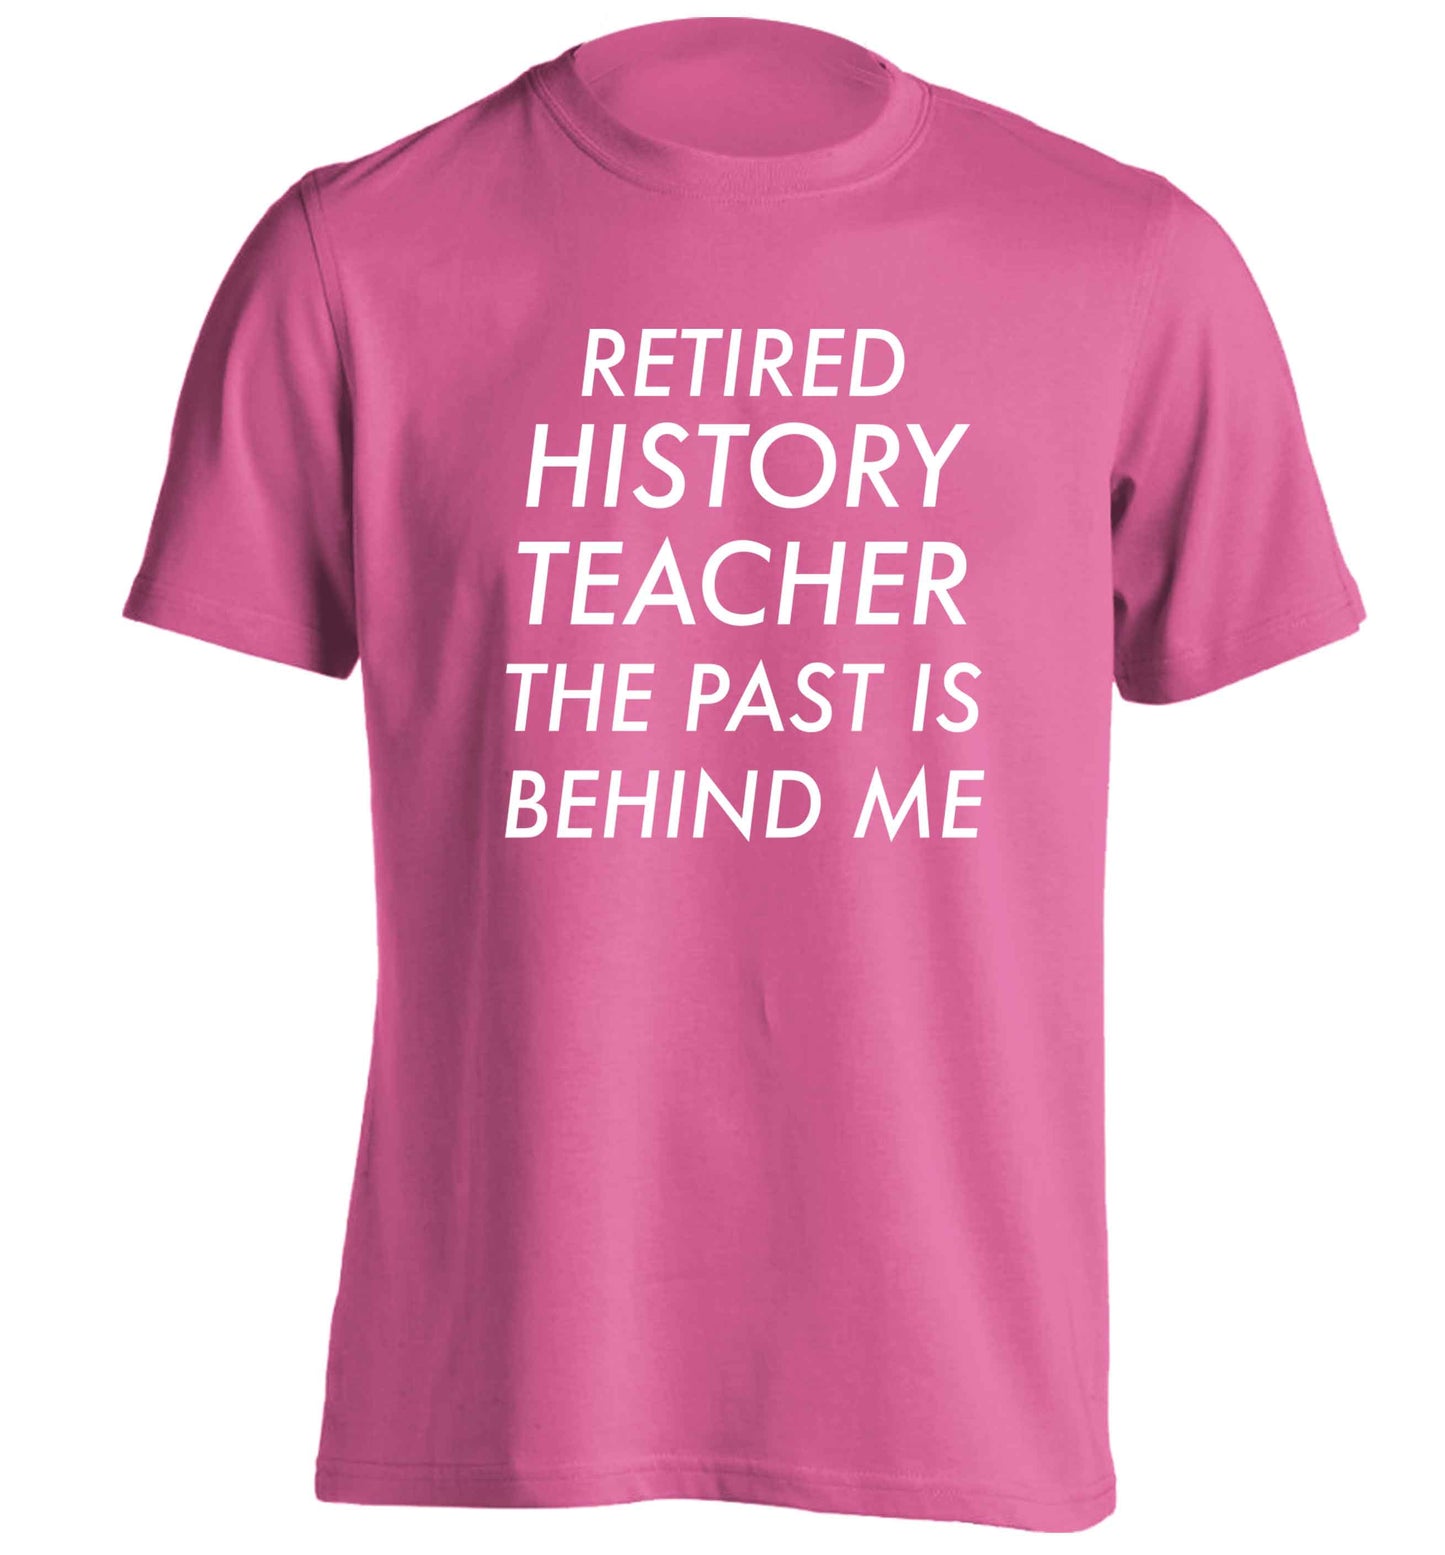 Retired history teacher the past is behind me adults unisex pink Tshirt 2XL